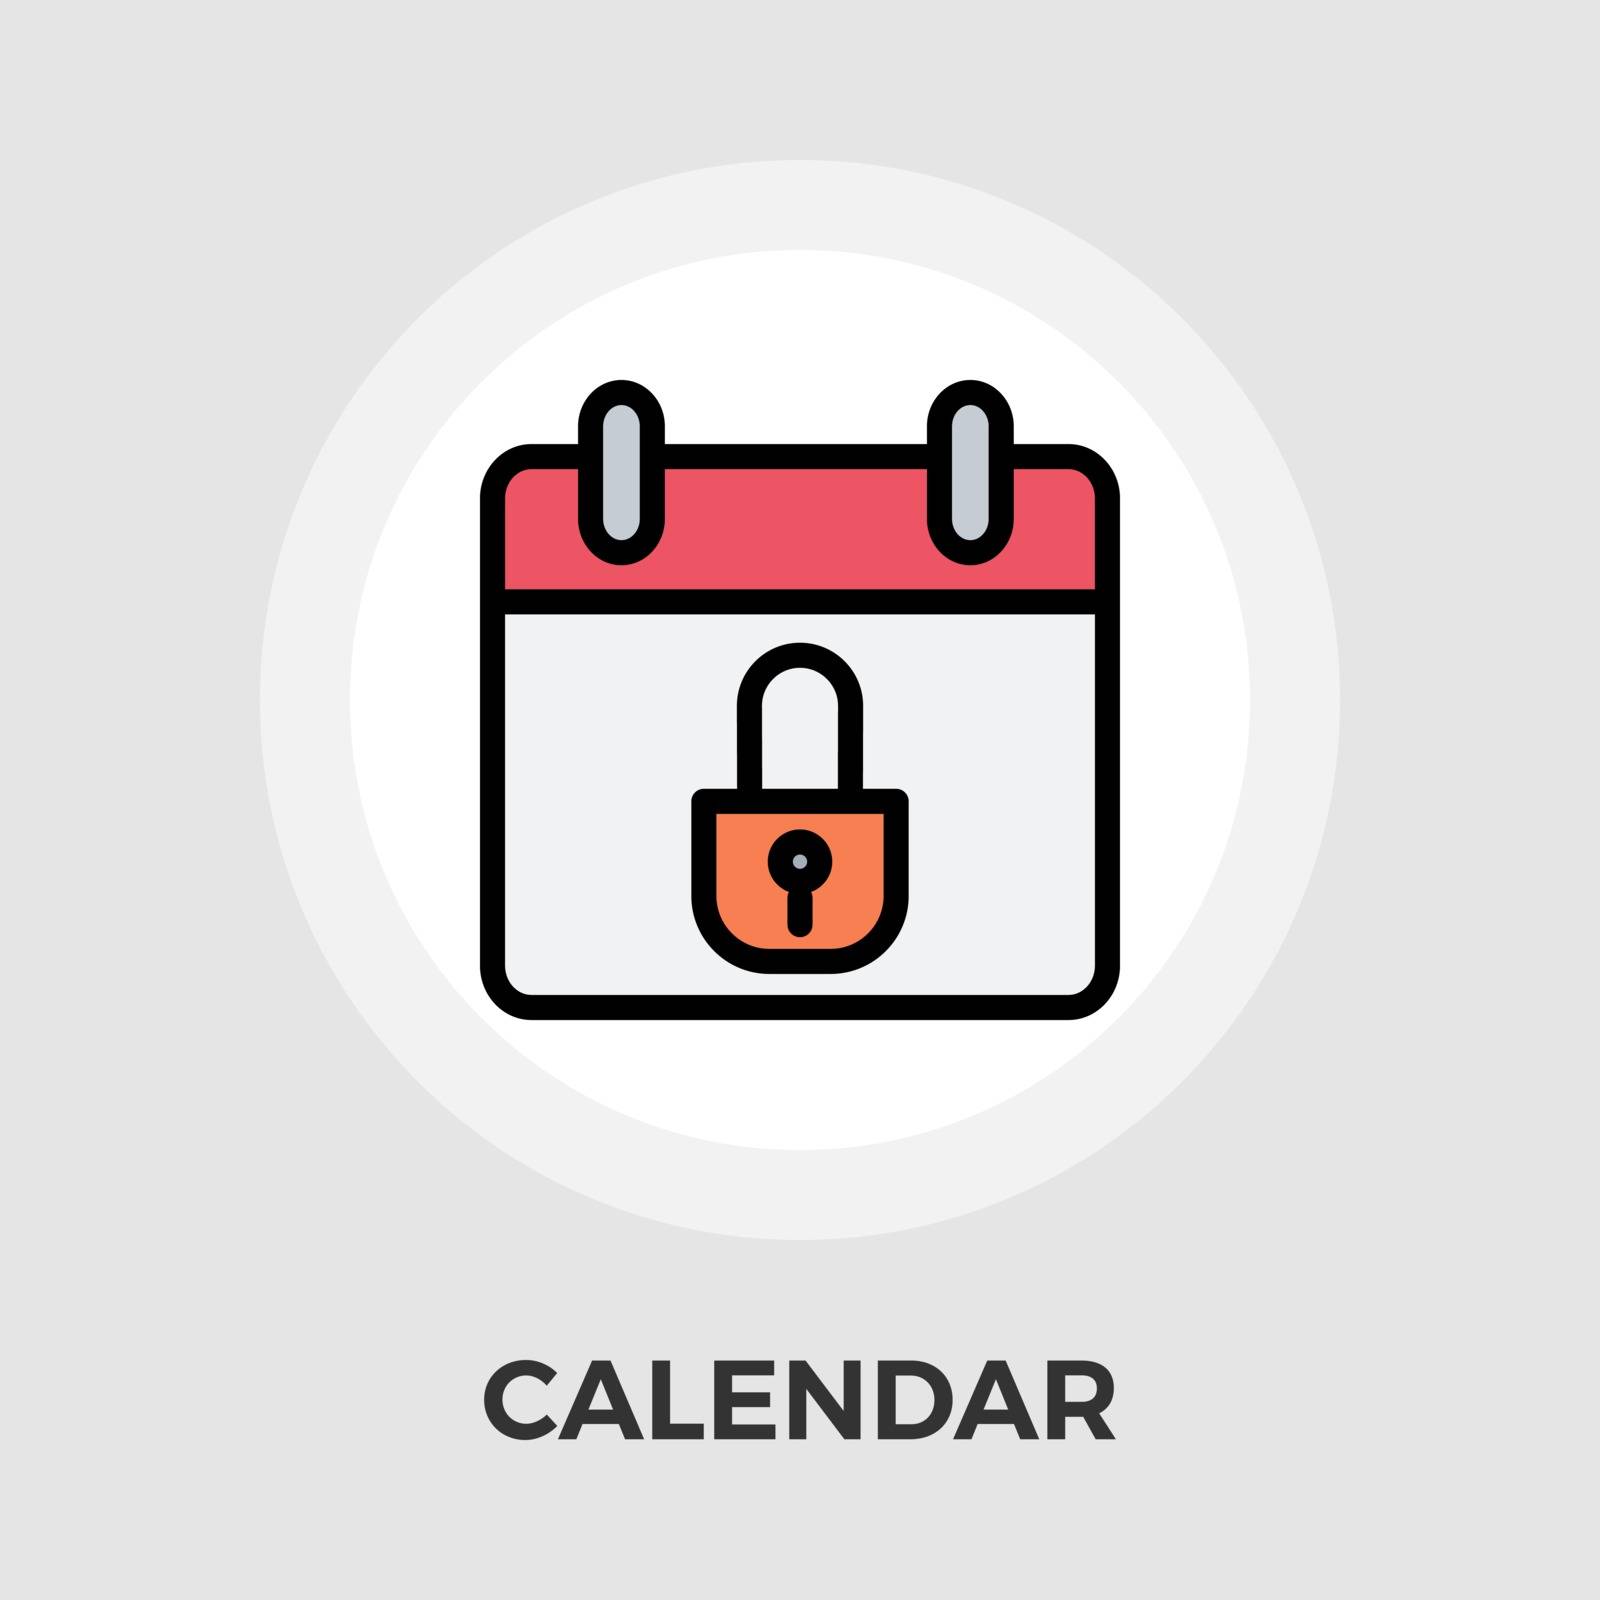 Calendar with padlock icon vector. Flat icon isolated on the white background. Editable EPS file. Vector illustration.